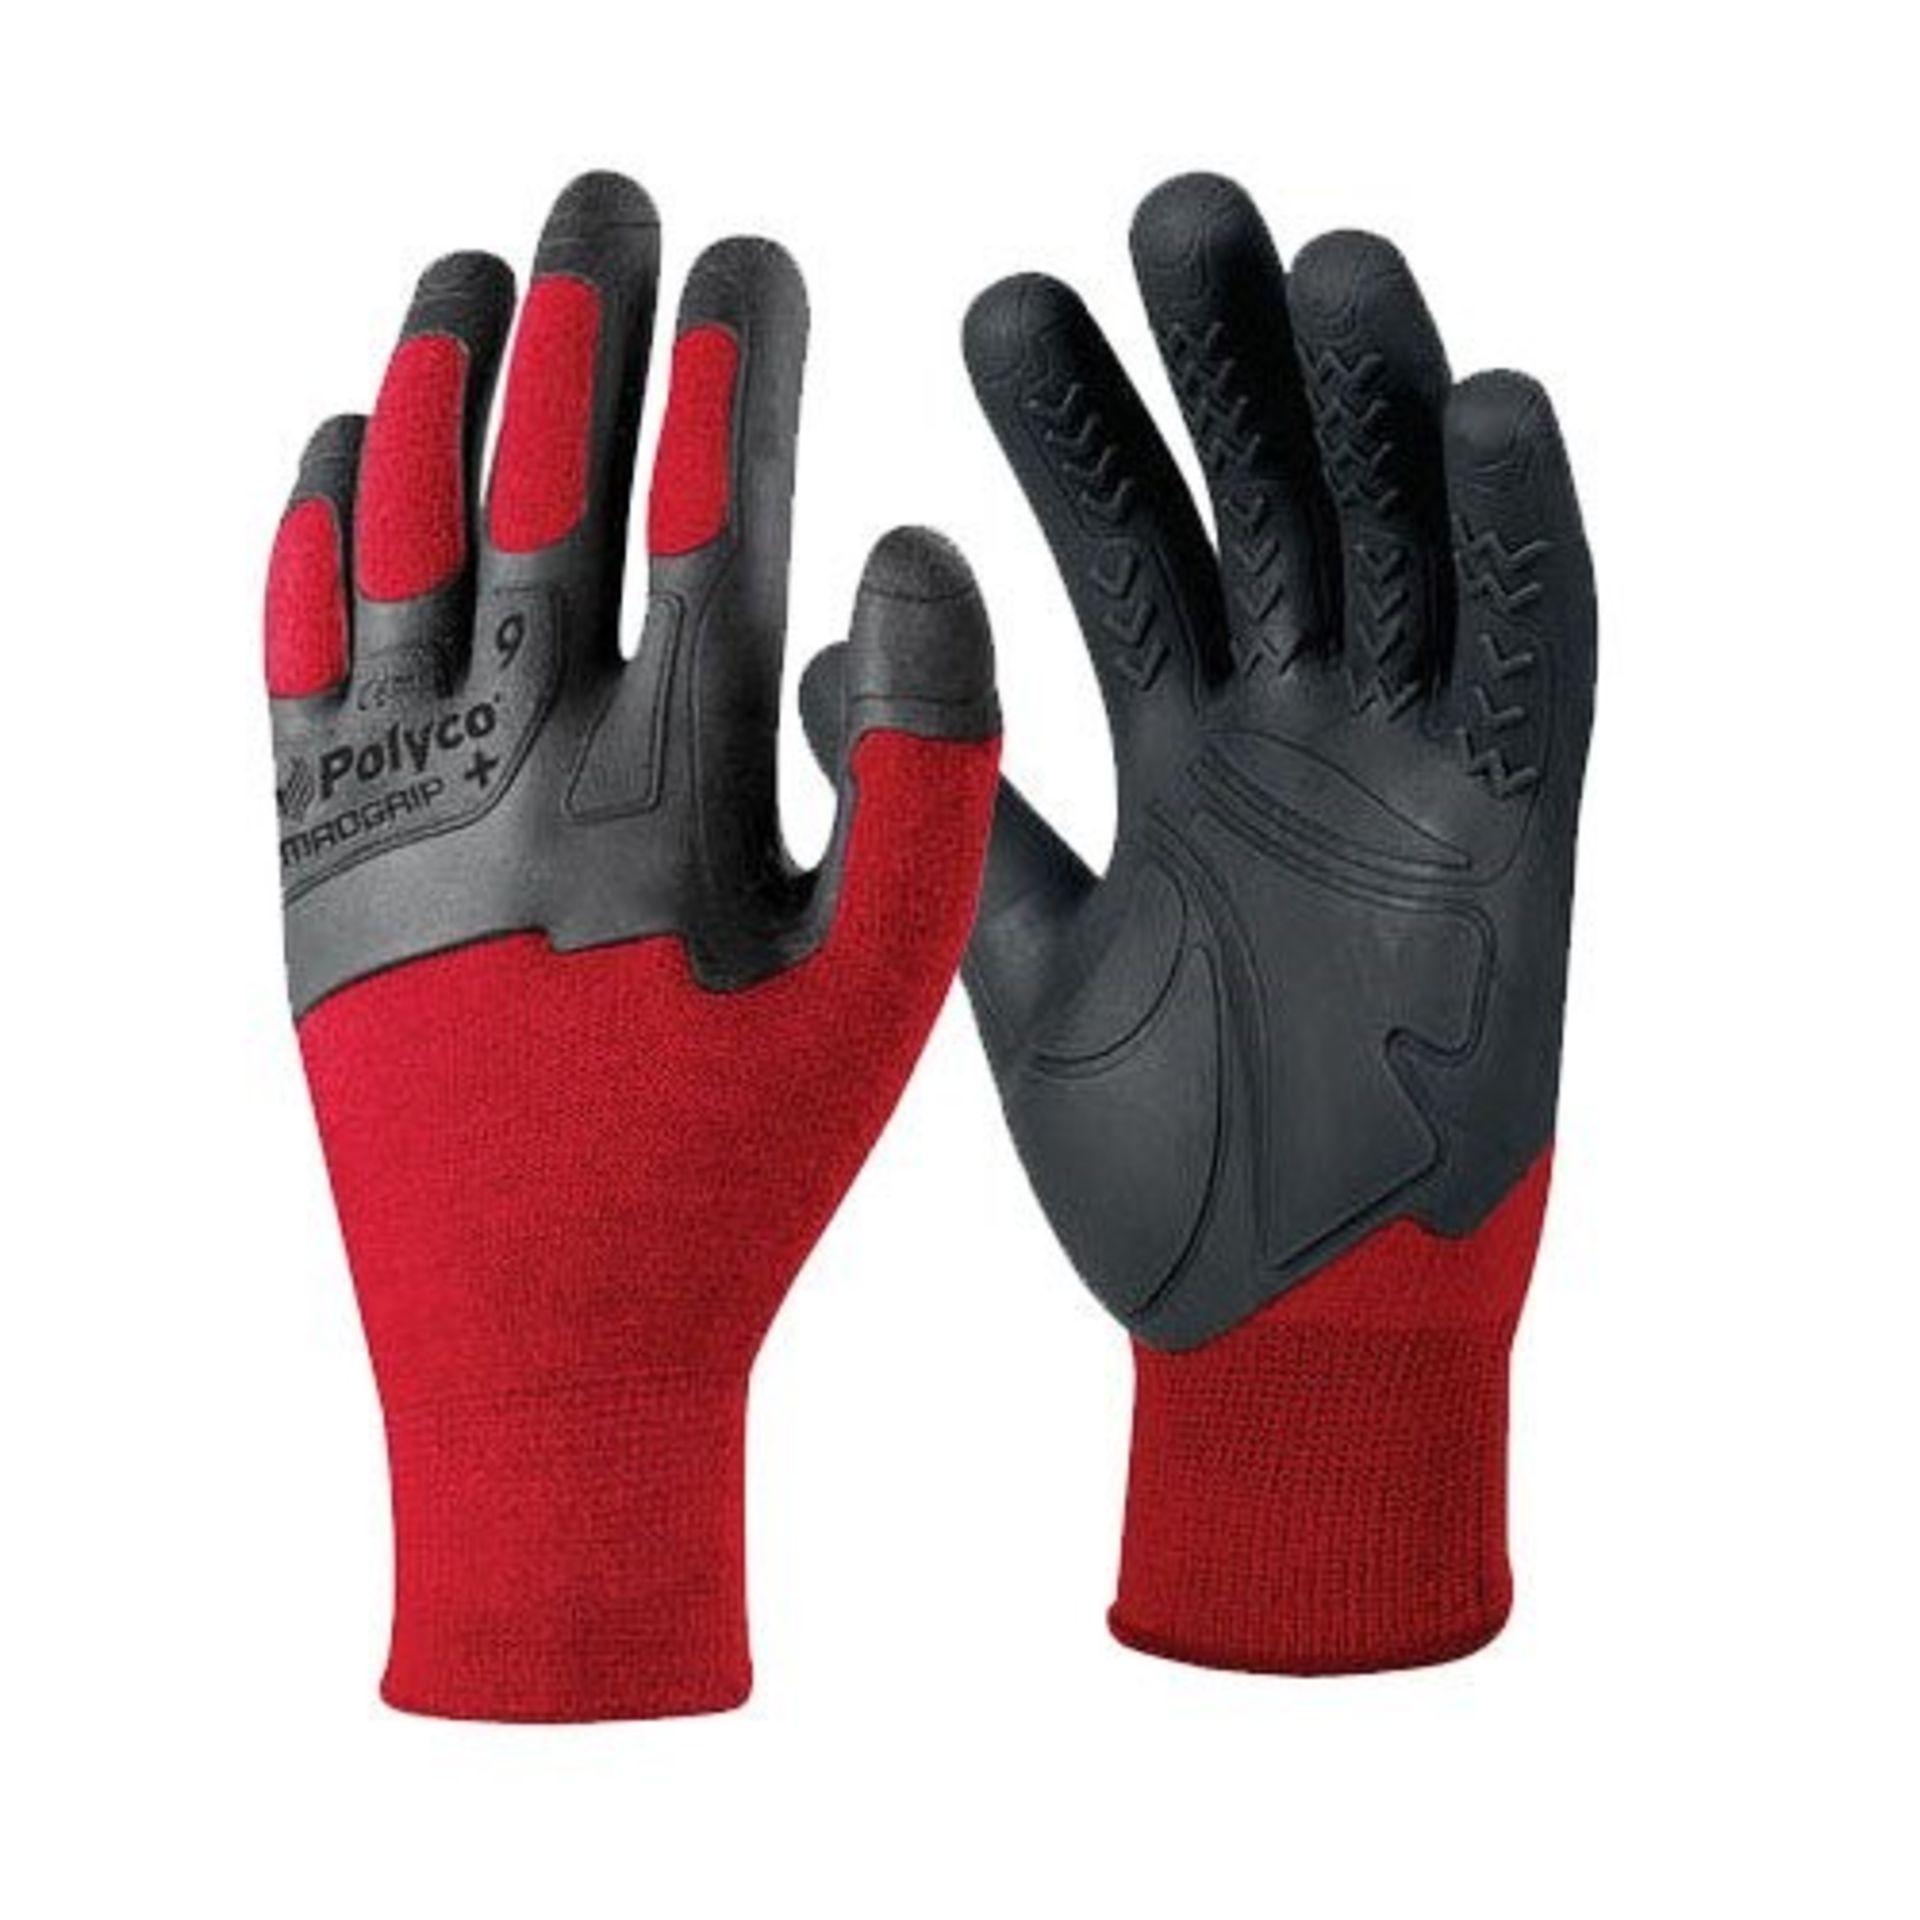 1 AS NEW BAGGED PAIR OF POLYCO FIRE RISTANCE MADGRIP + SIZE 9 SAFETY GLOVES IN RED AND BLACK (